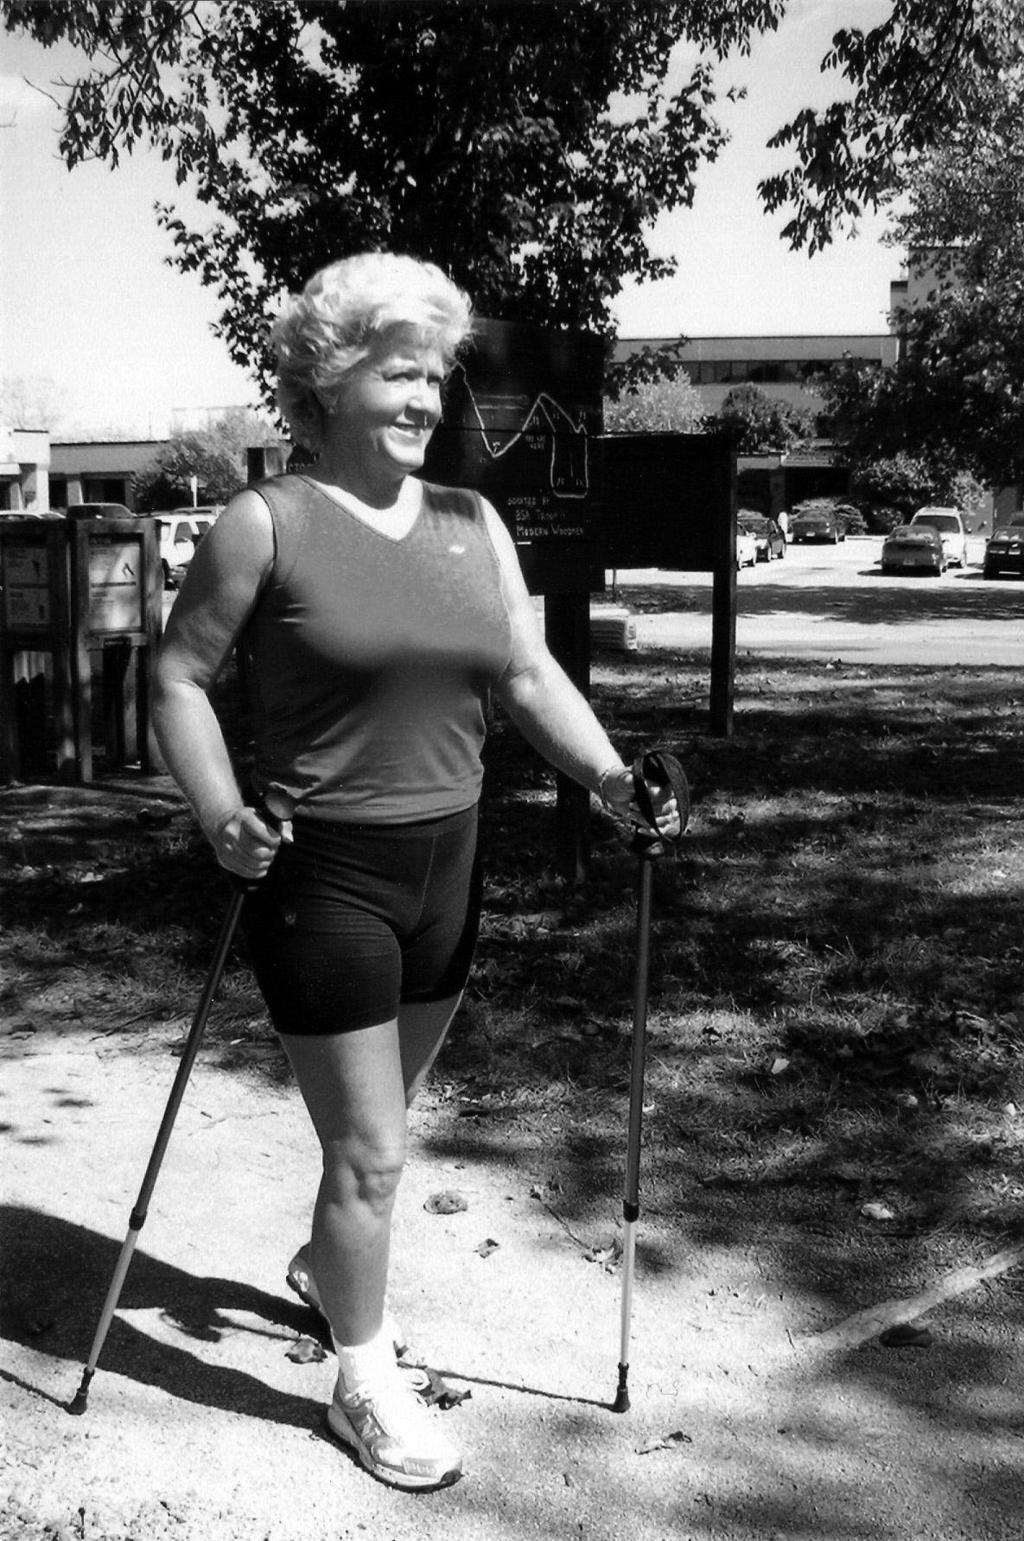 Nordic Walking In a normal walking pattern, the left arm swings forward as the right leg extends to allow the foot to strike the ground for propulsion, followed by the right arm swing and left foot